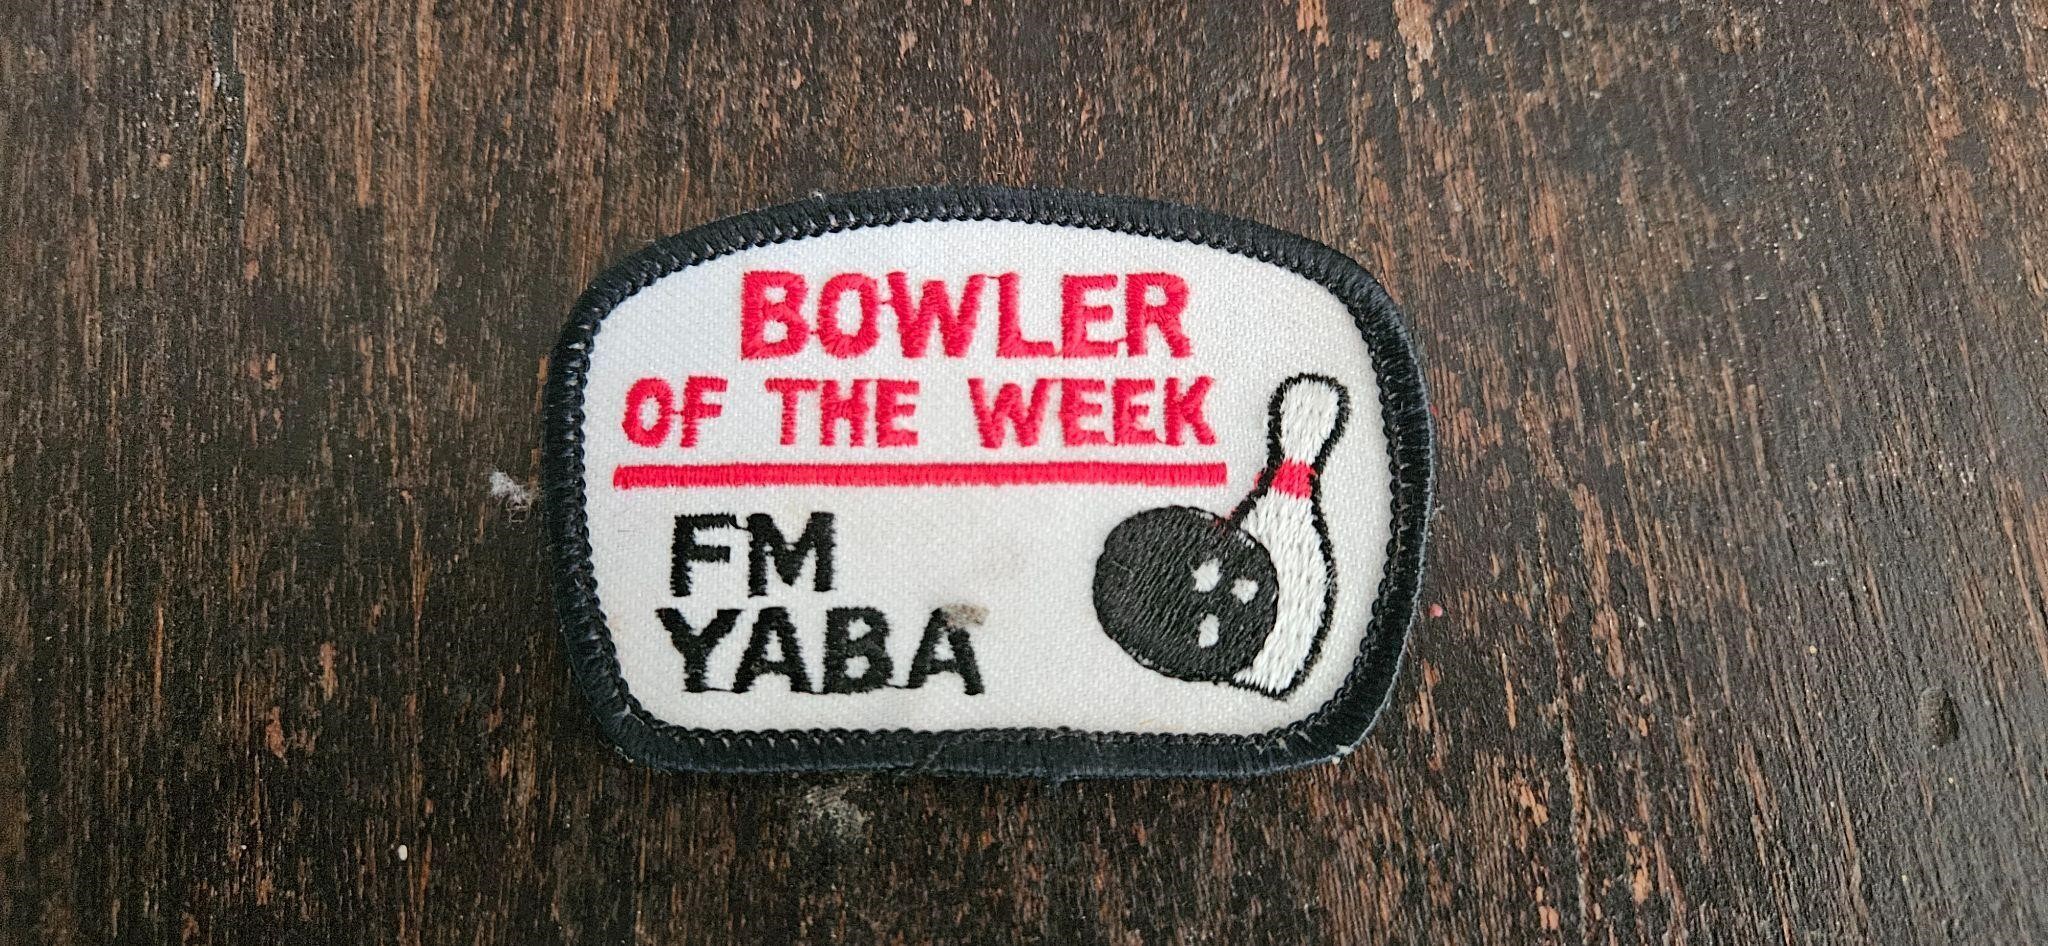 Bowler of the Week FM YABA Patch